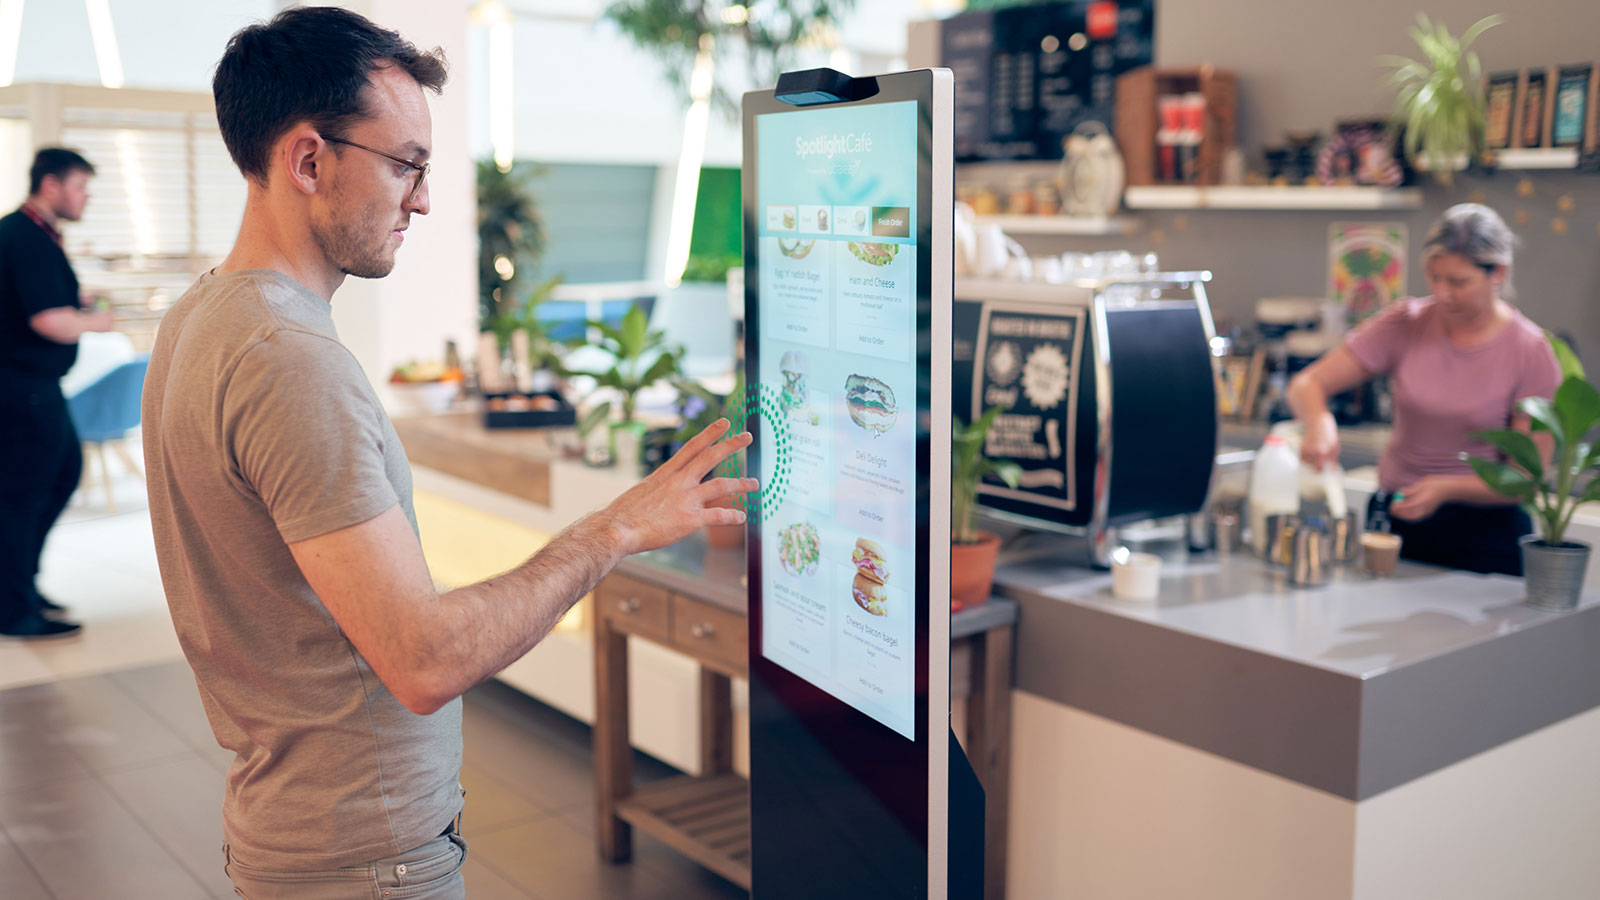 Man ordering lunch using touchless technology on a kiosk